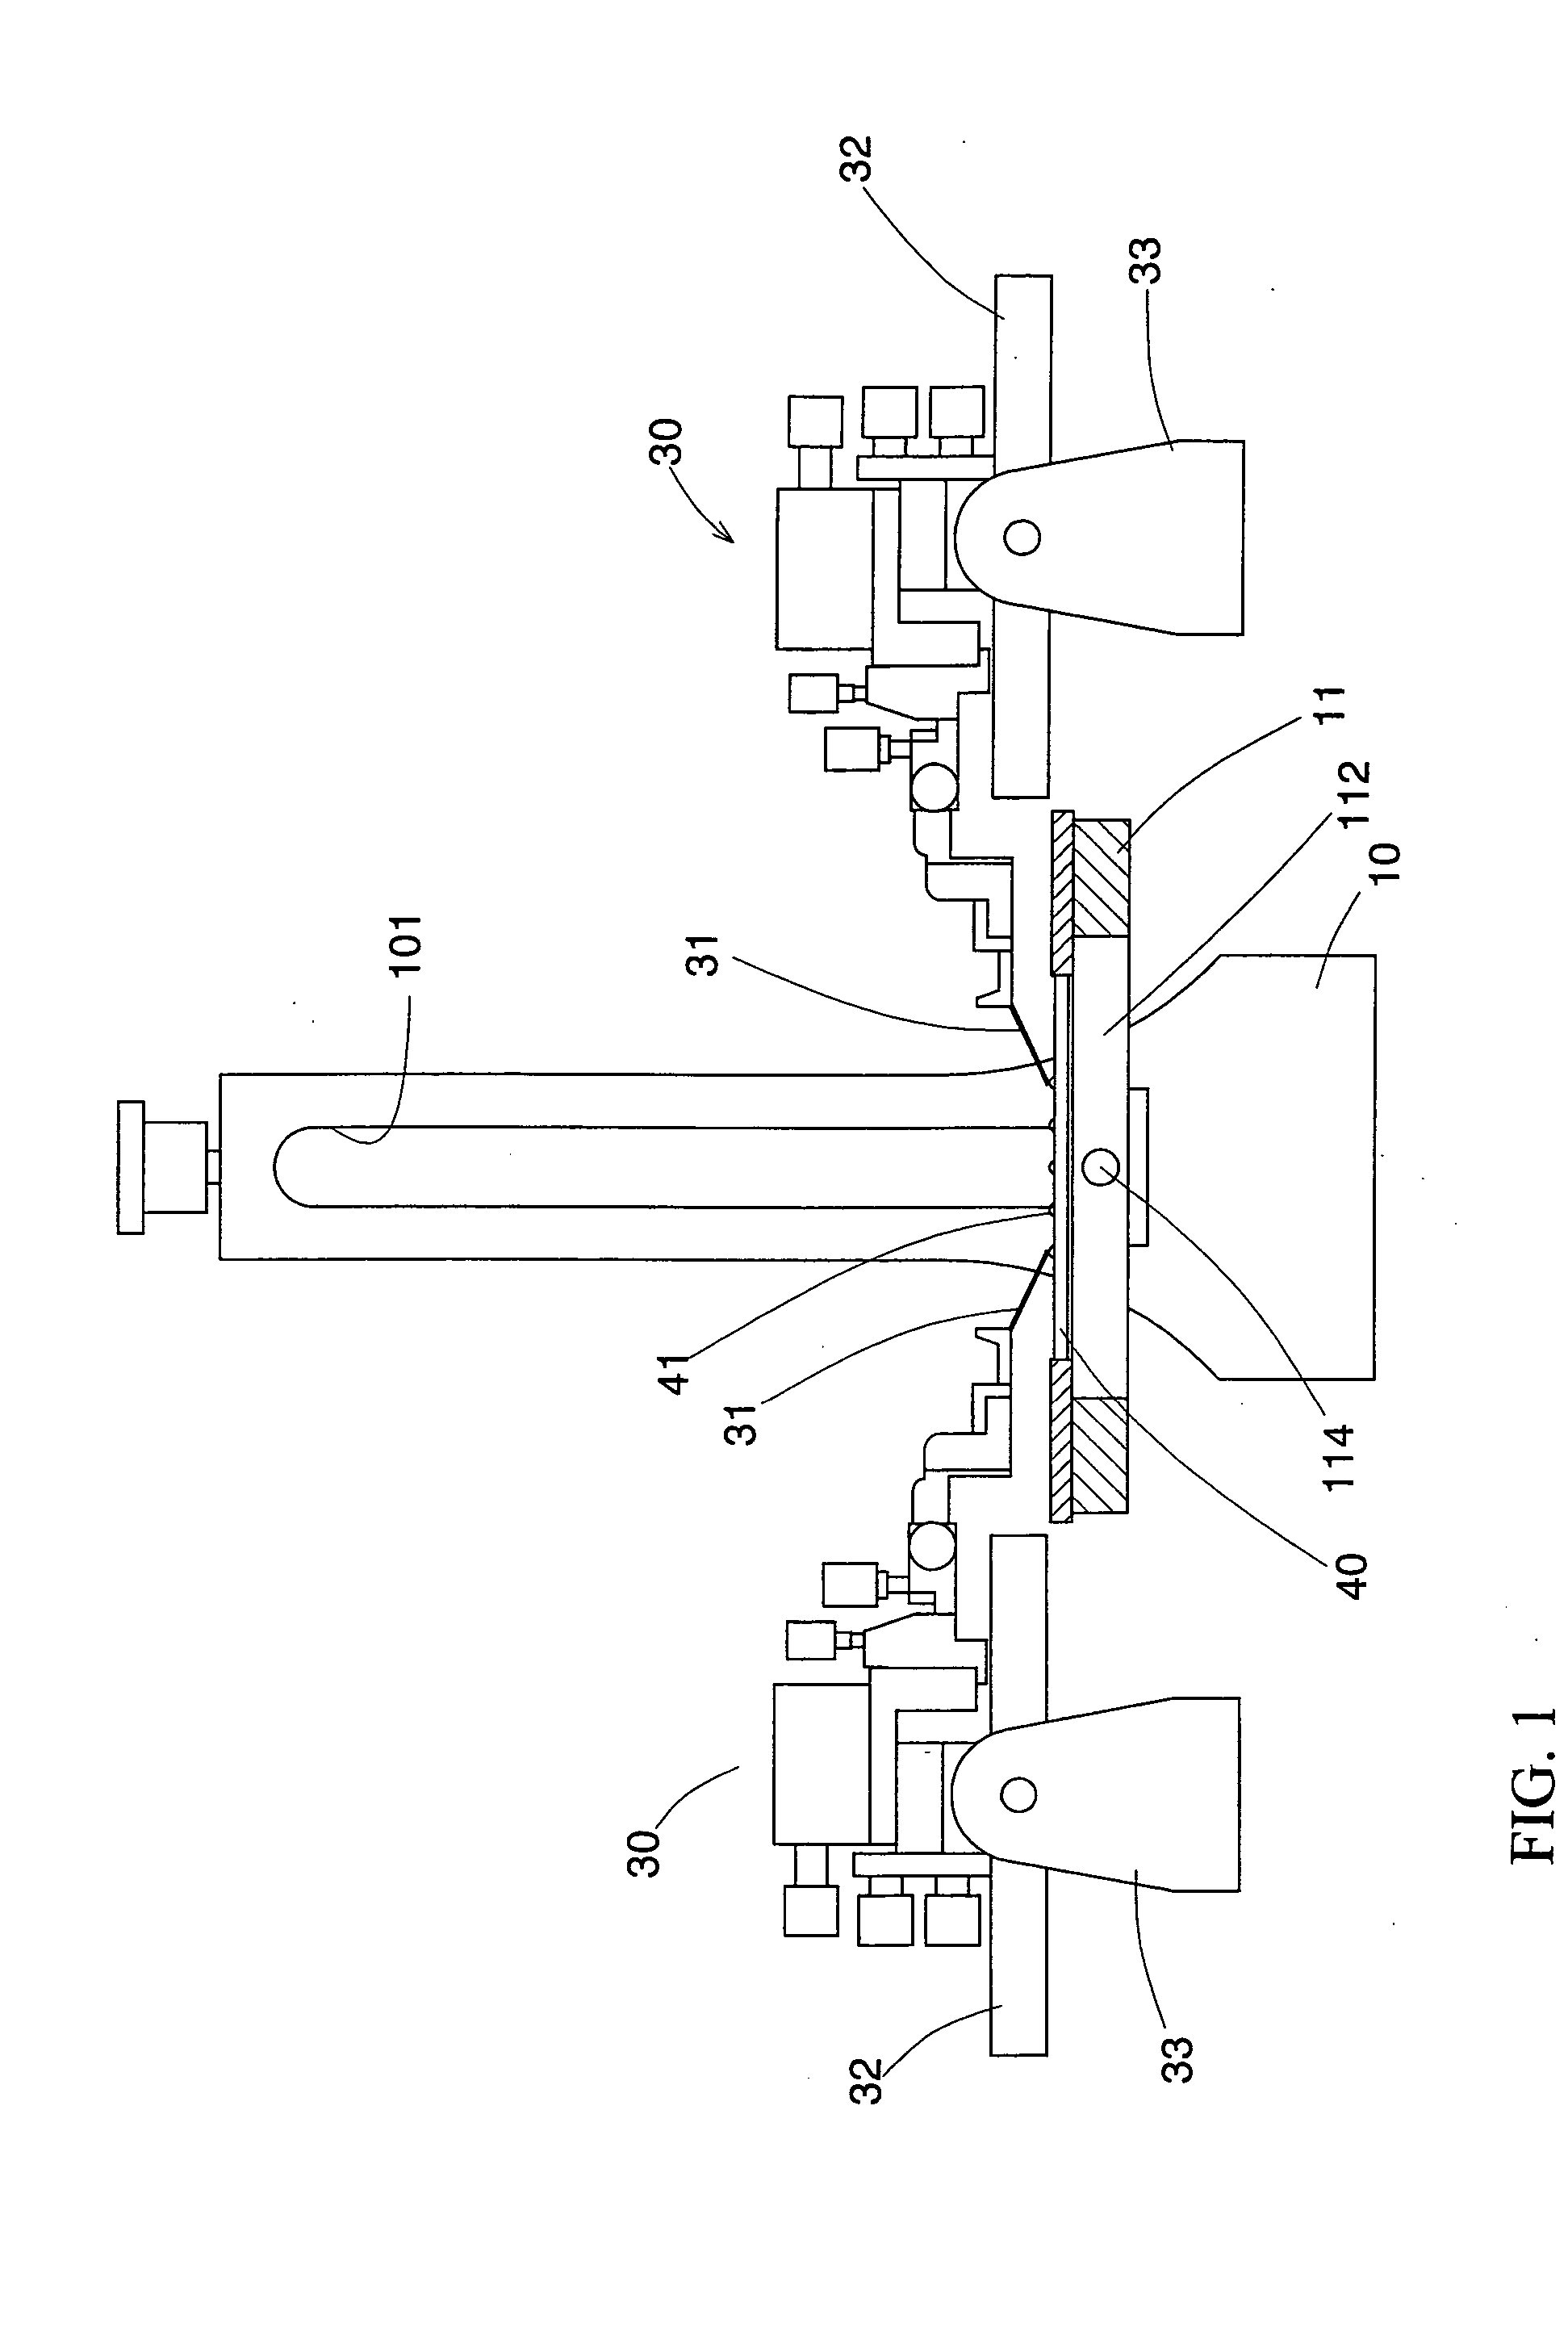 Double-faced detecting devices for an electronic substrate